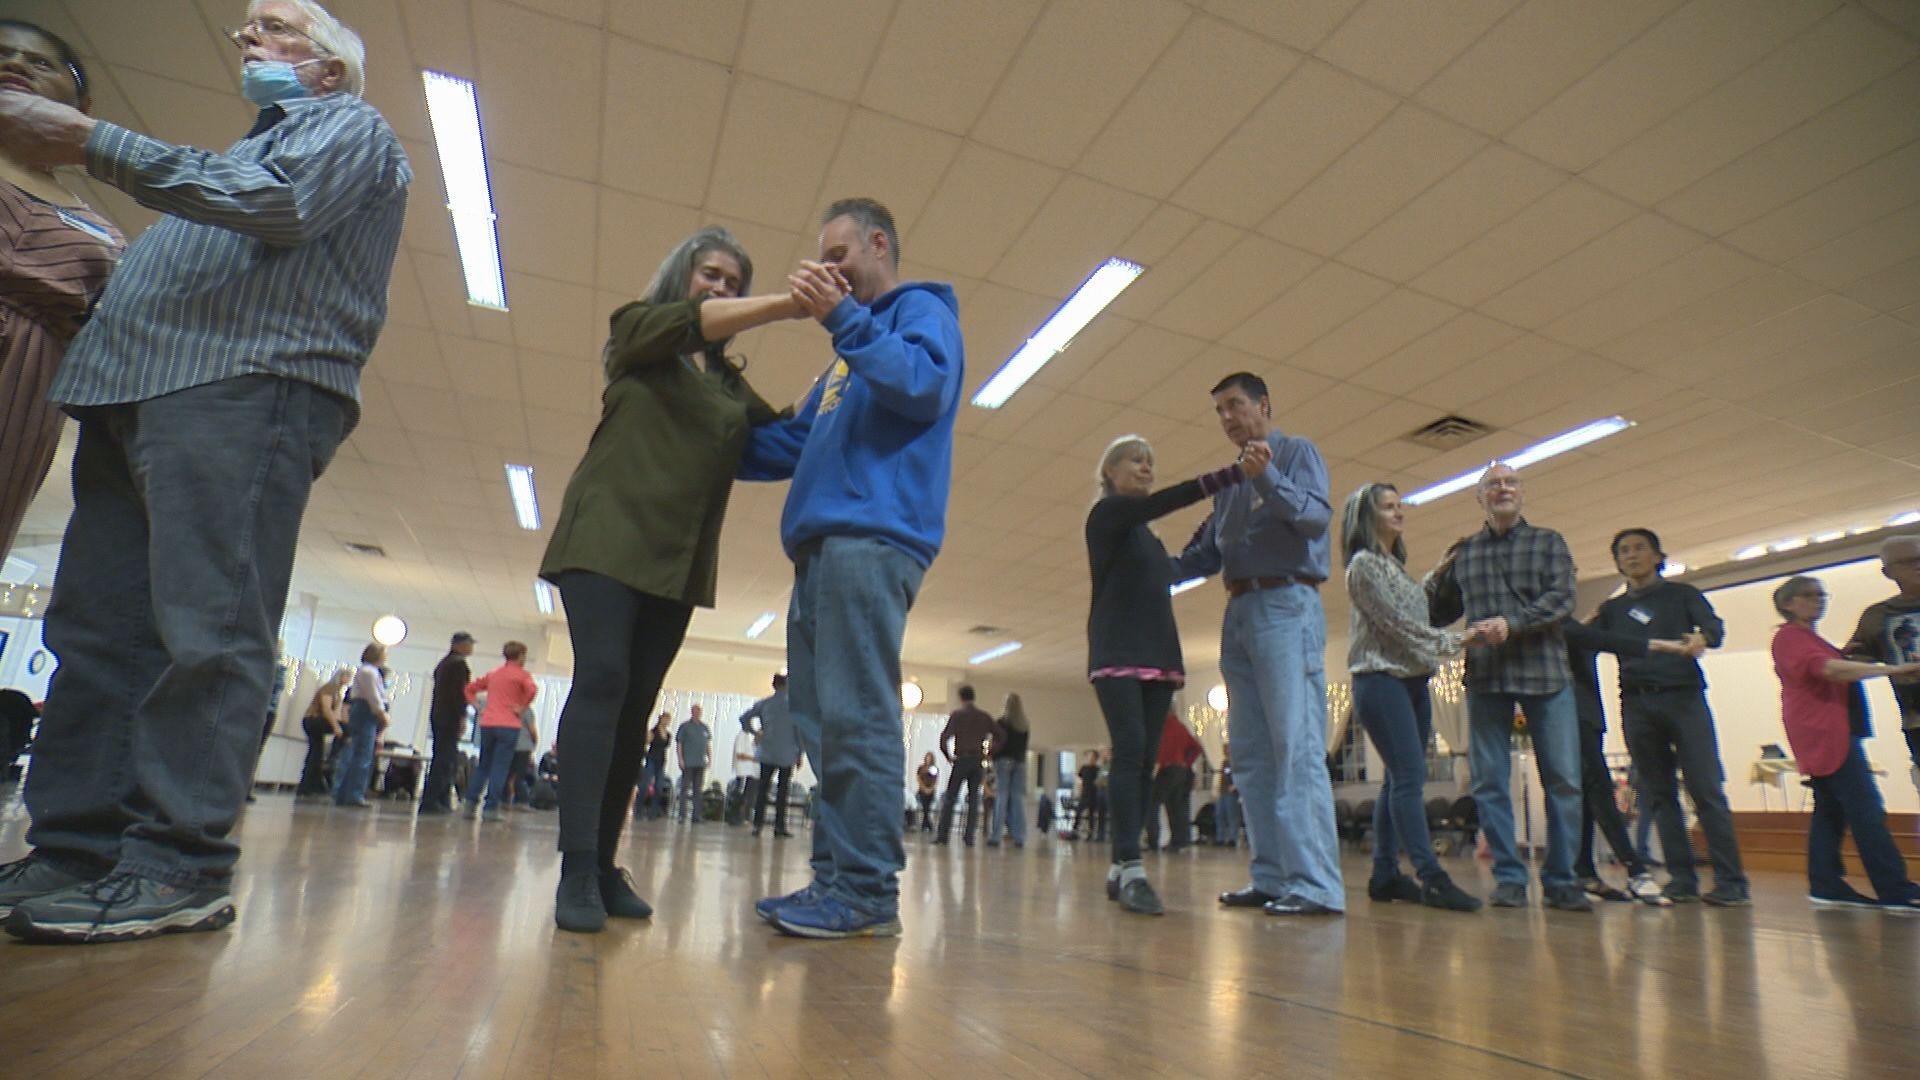 The free dance event began during the COVID-19 pandemic for people to reconnect with their community, get some exercise and make new friends.